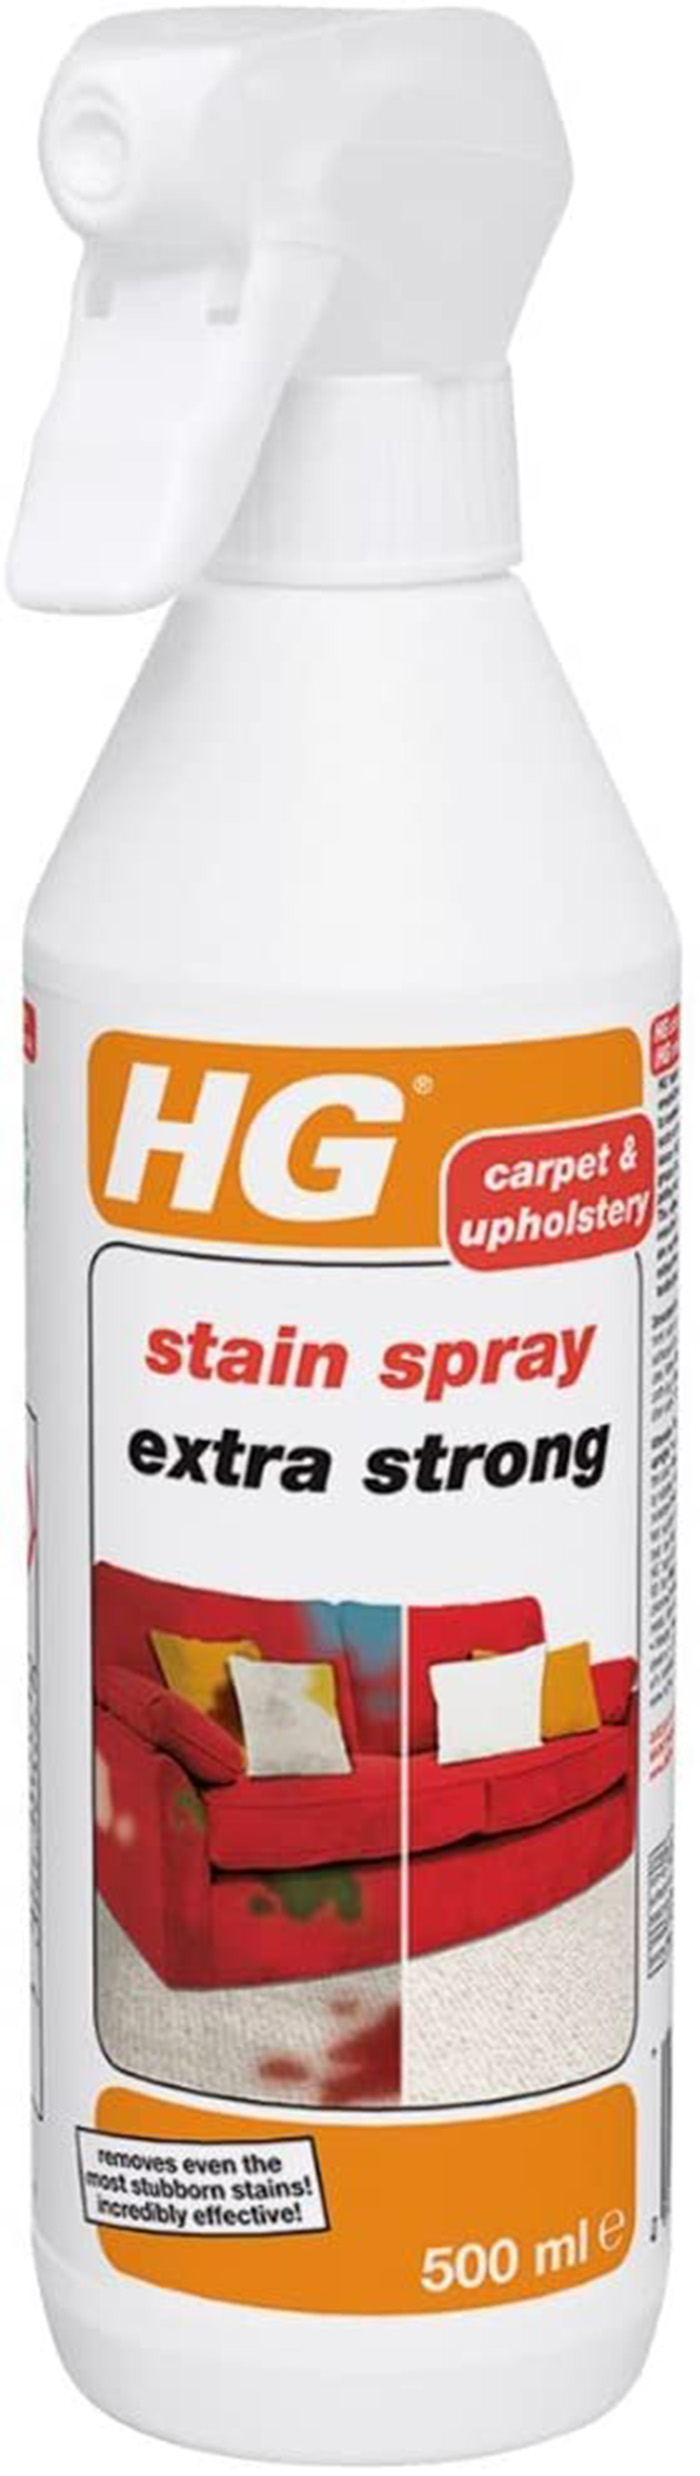 HG STAIN SPRAY EXTRA STRONG 500ML